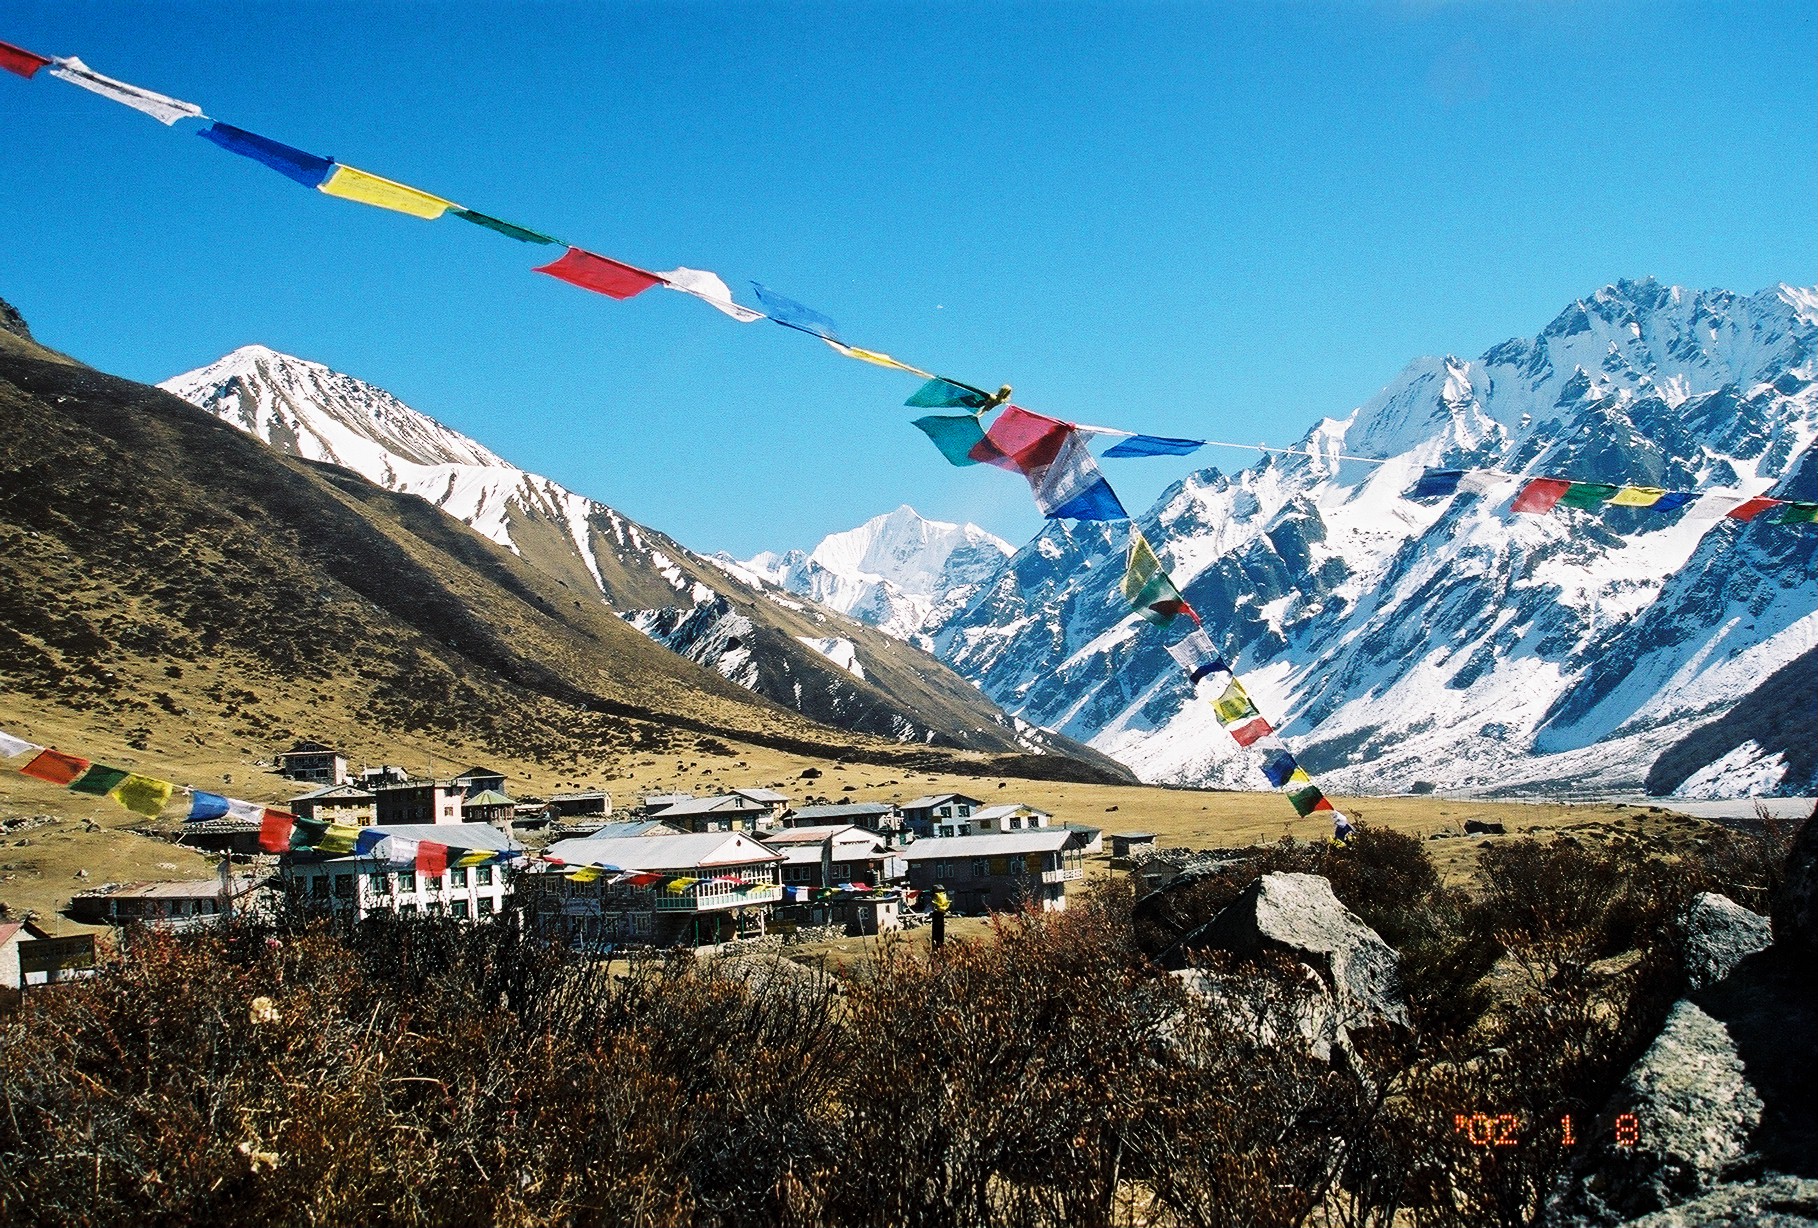 Tamang Heritage Trail (THT) Combining with the Langtang Valley Trek